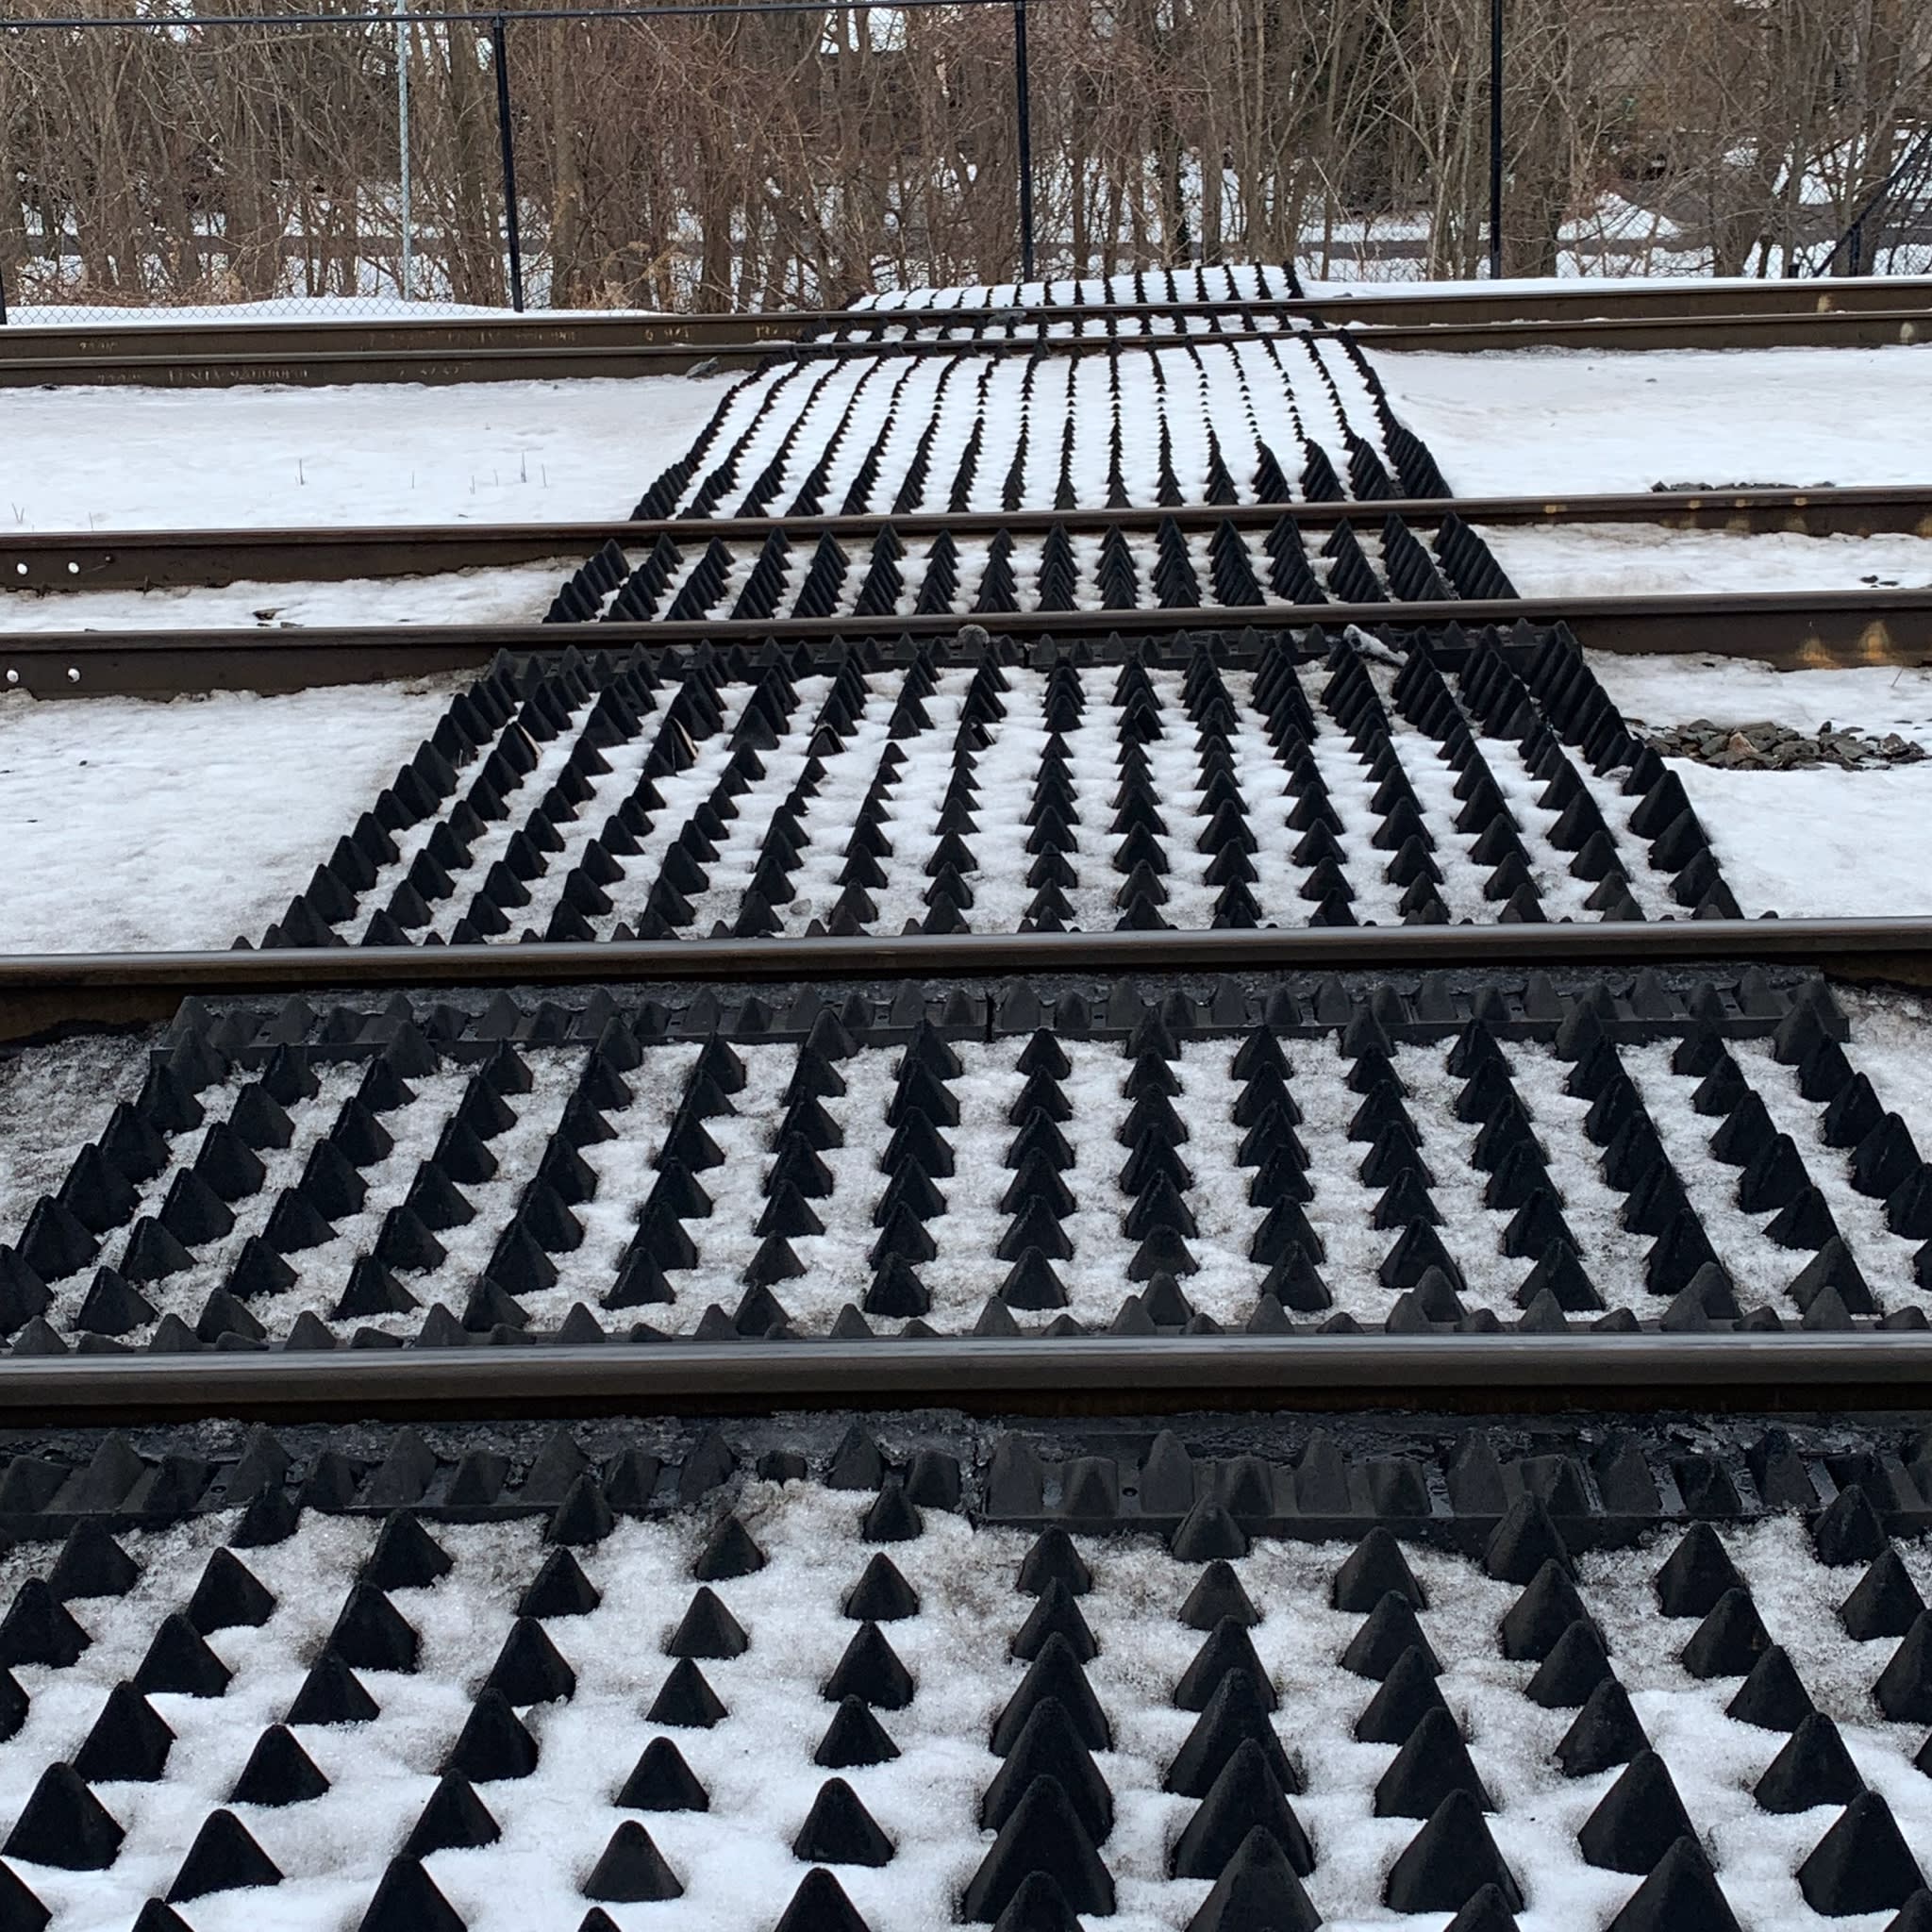 A the rubber safety panels laying next to the tracks